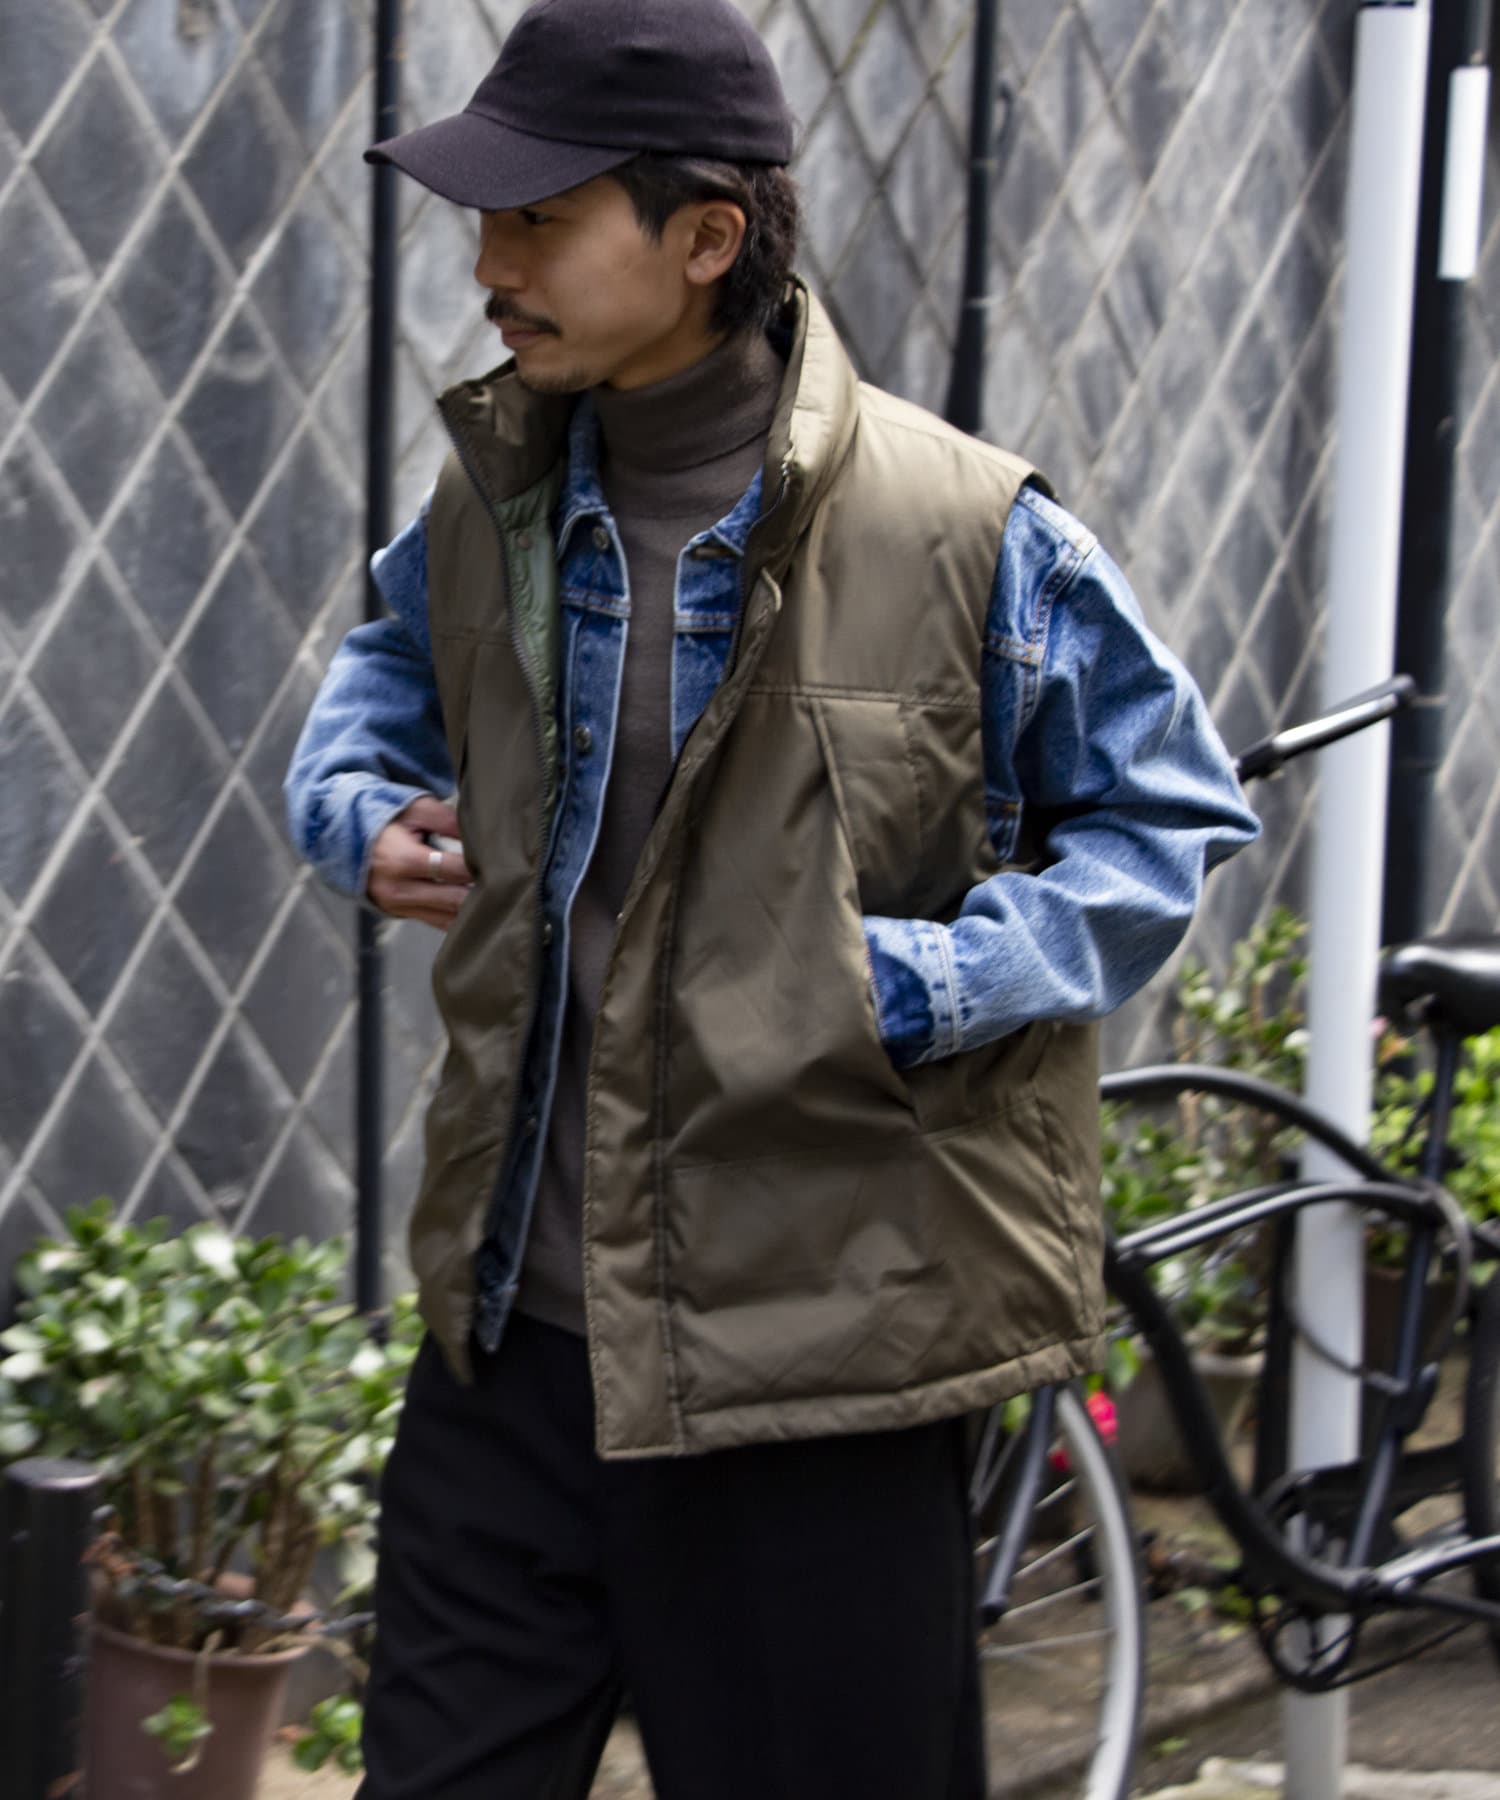 TAION】GLOSTER別注 モンスターベスト MILITALY vest | FREDY 